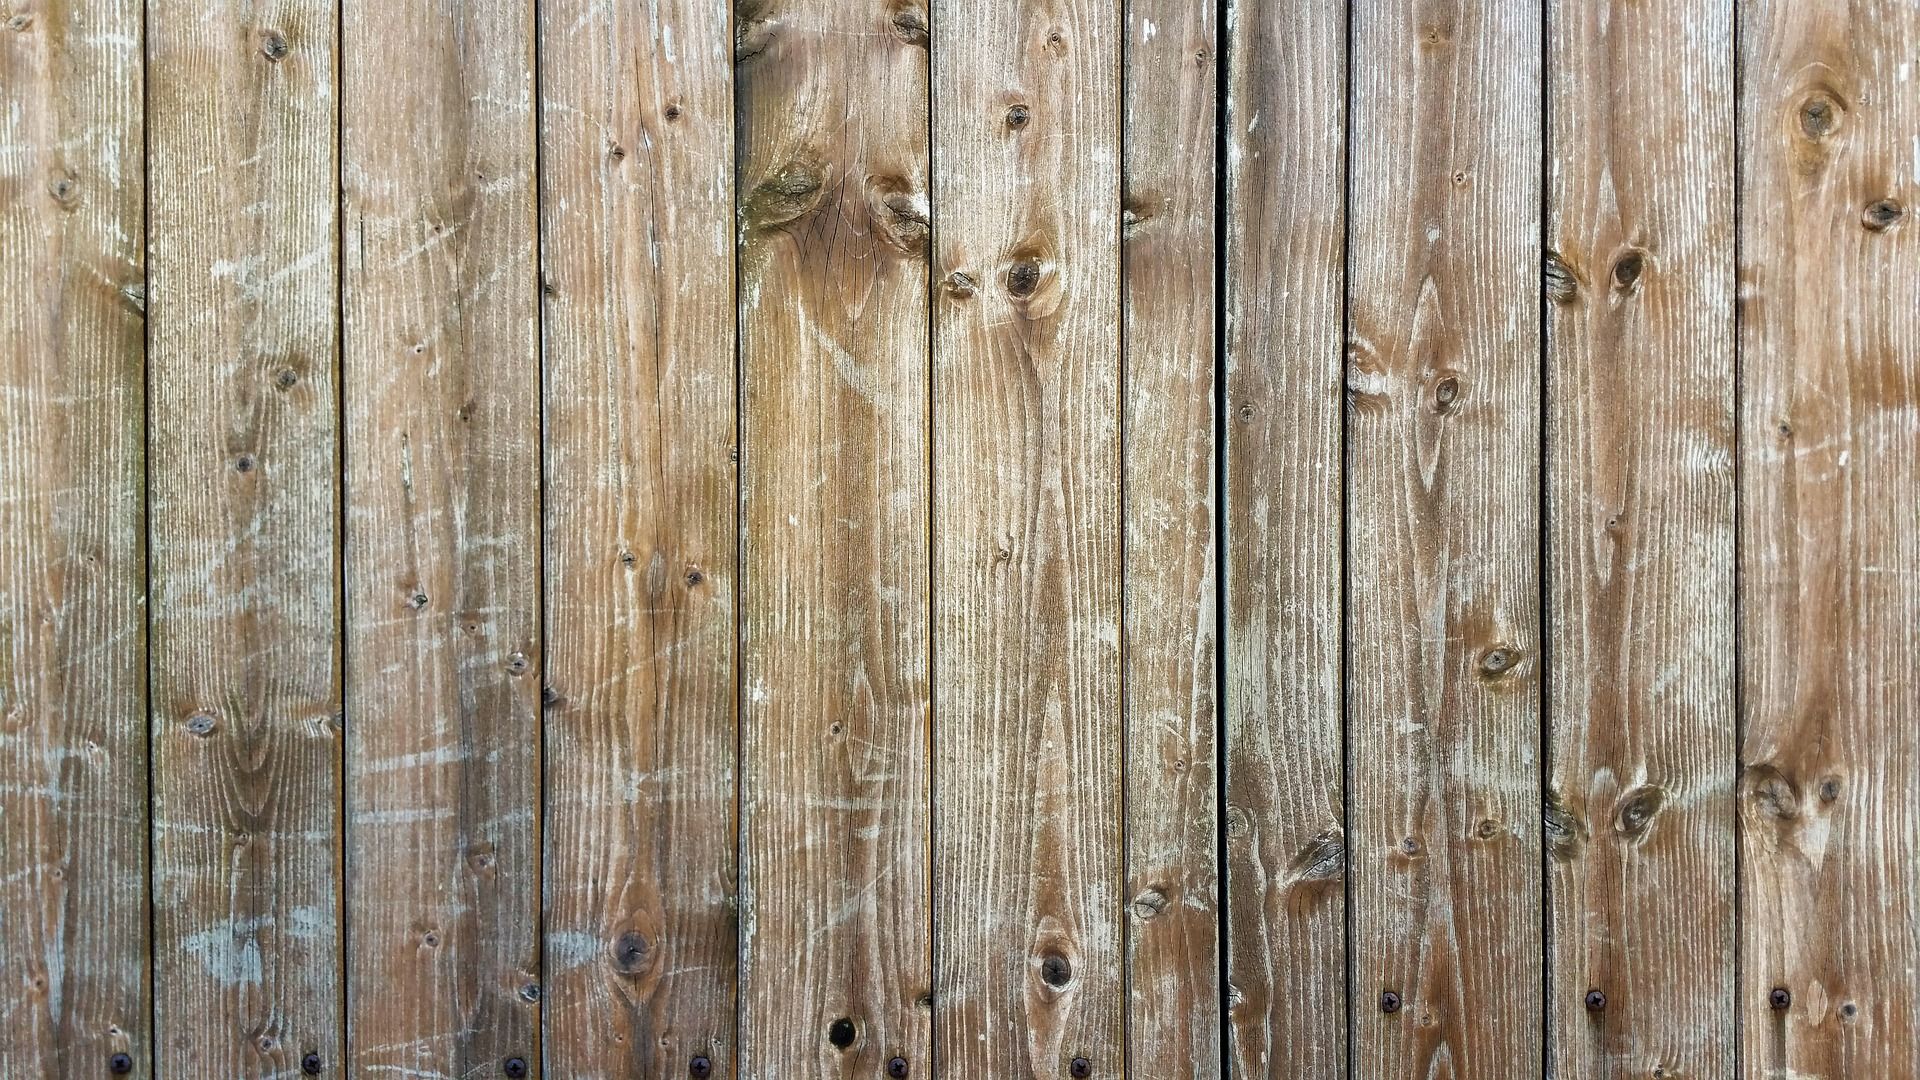 How to Clean a Wooden Fence